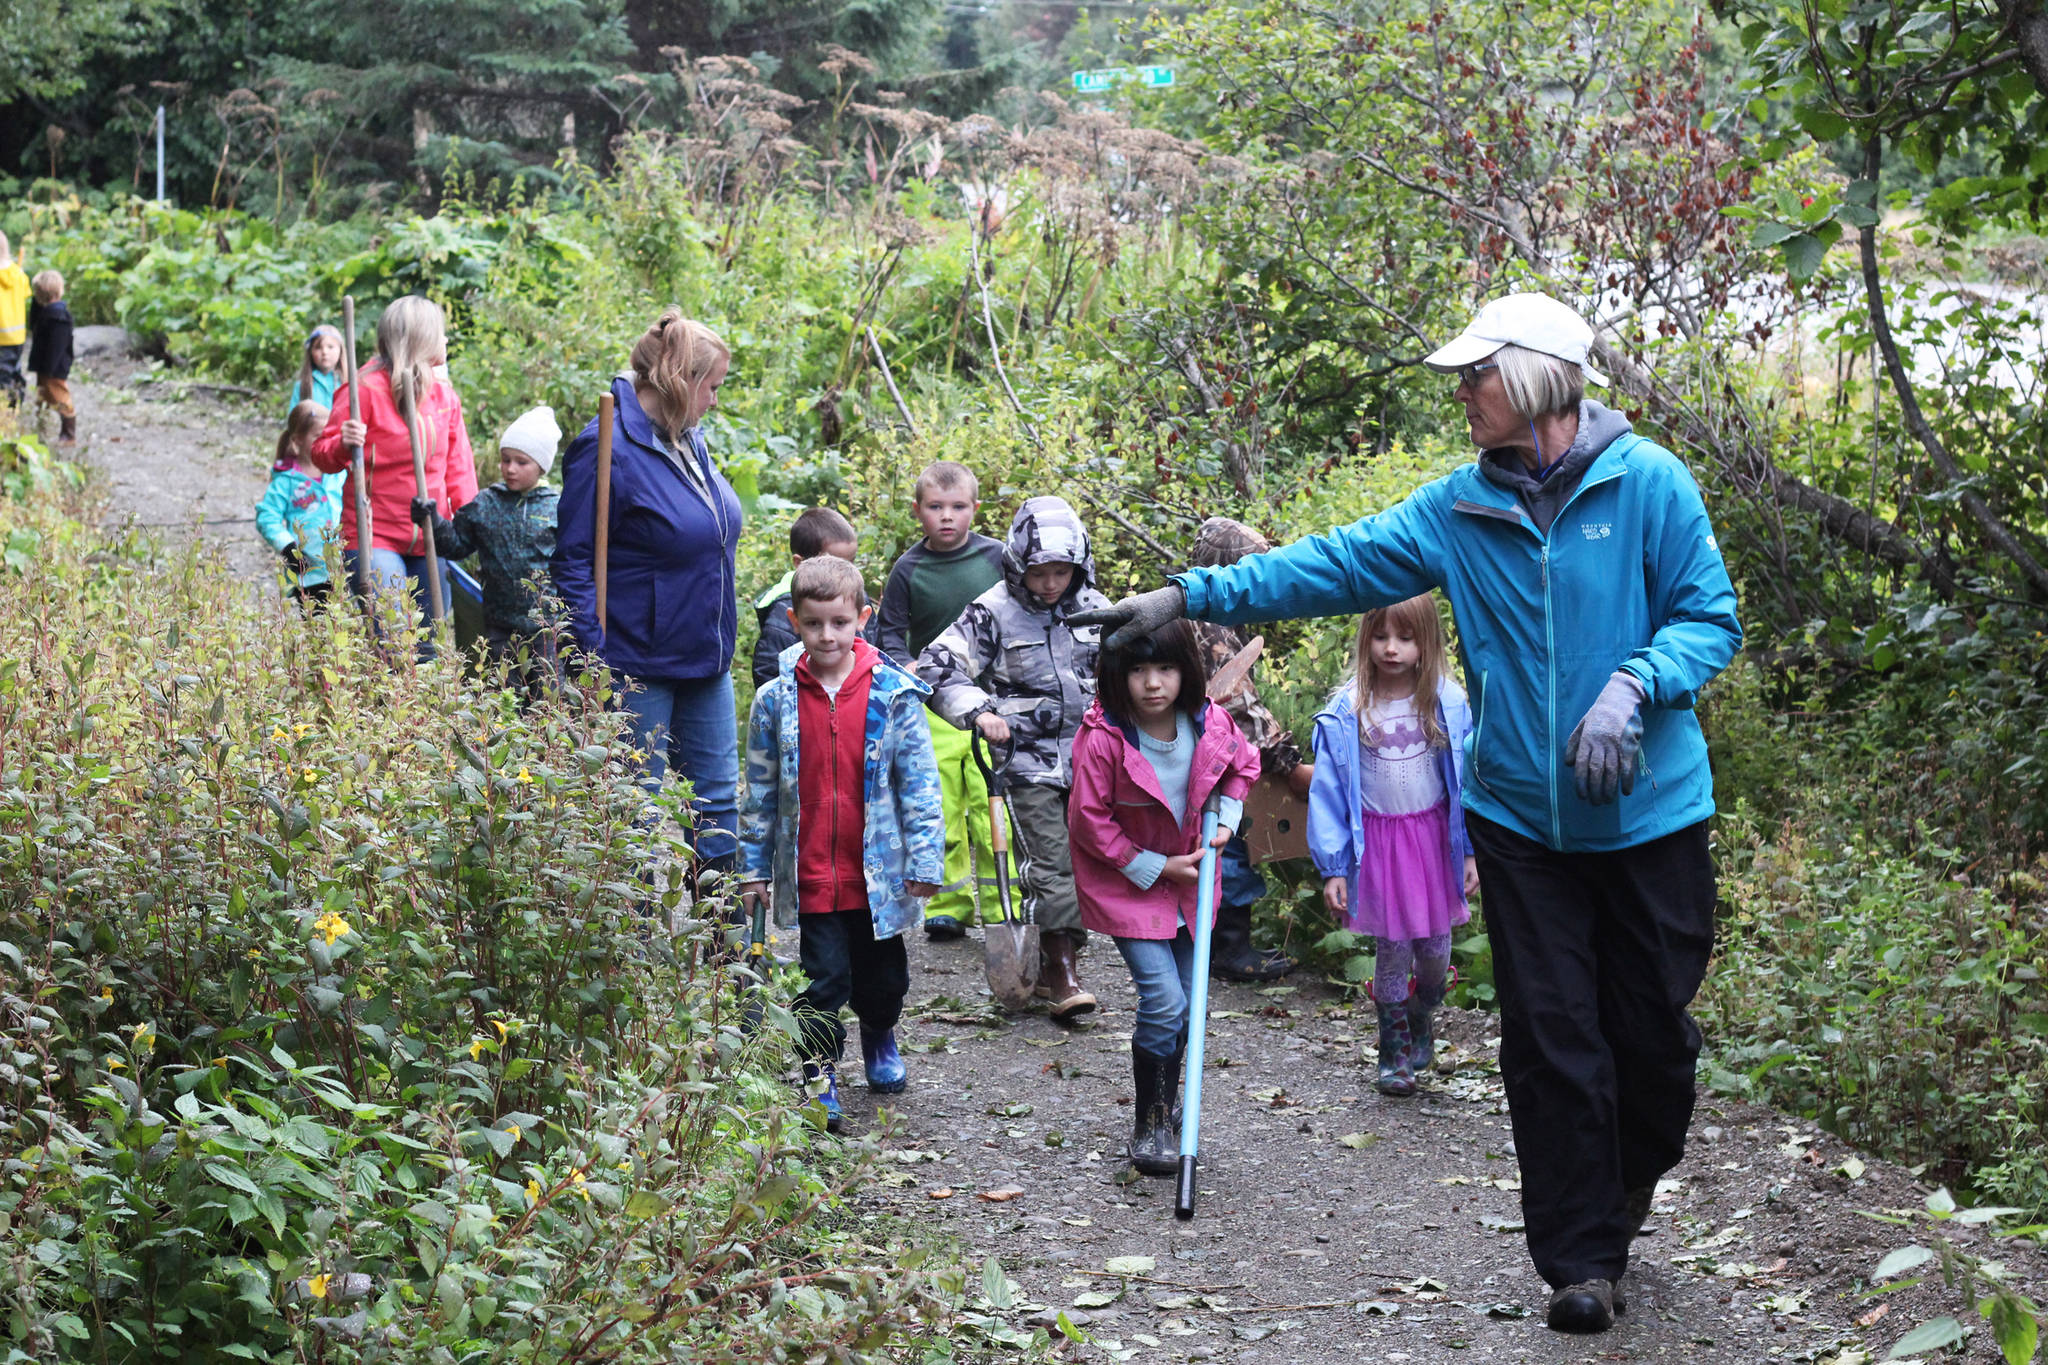 Deb Lowney leads a group of Paul Banks Elementary students along a recently-completed train at Karen Hornaday Park on Thursday, Sept. 7, 2017 in Homer, Alaska. The kids volunteered to transplant pine trees from a nearby street to the trails to help diversify the plant life in the park. (Photo by Megan Pacer/Homer News)